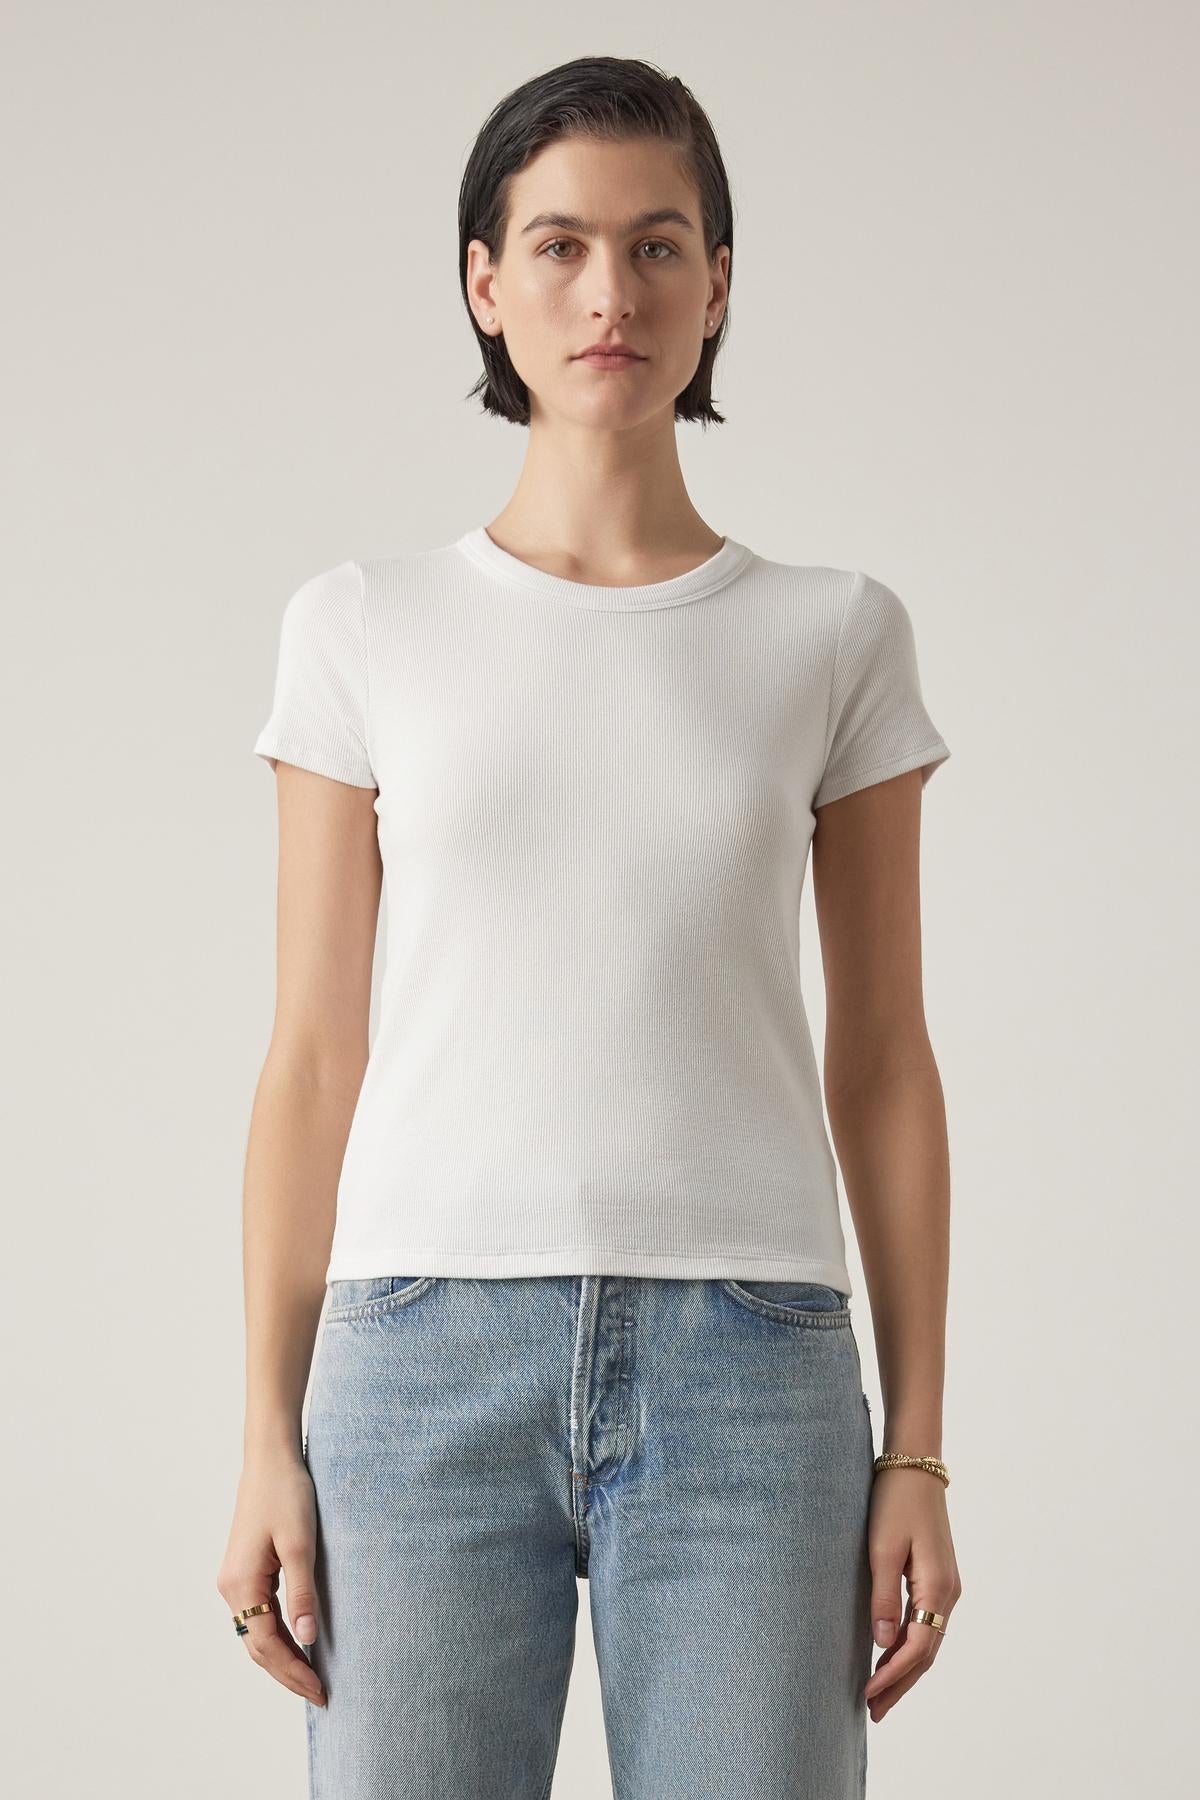 A woman with short dark hair wearing a BEDFORD TEE by Velvet by Jenny Graham in white with a crew neckline and blue jeans stands against a neutral background, facing the camera with a neutral expression.-36753616765121